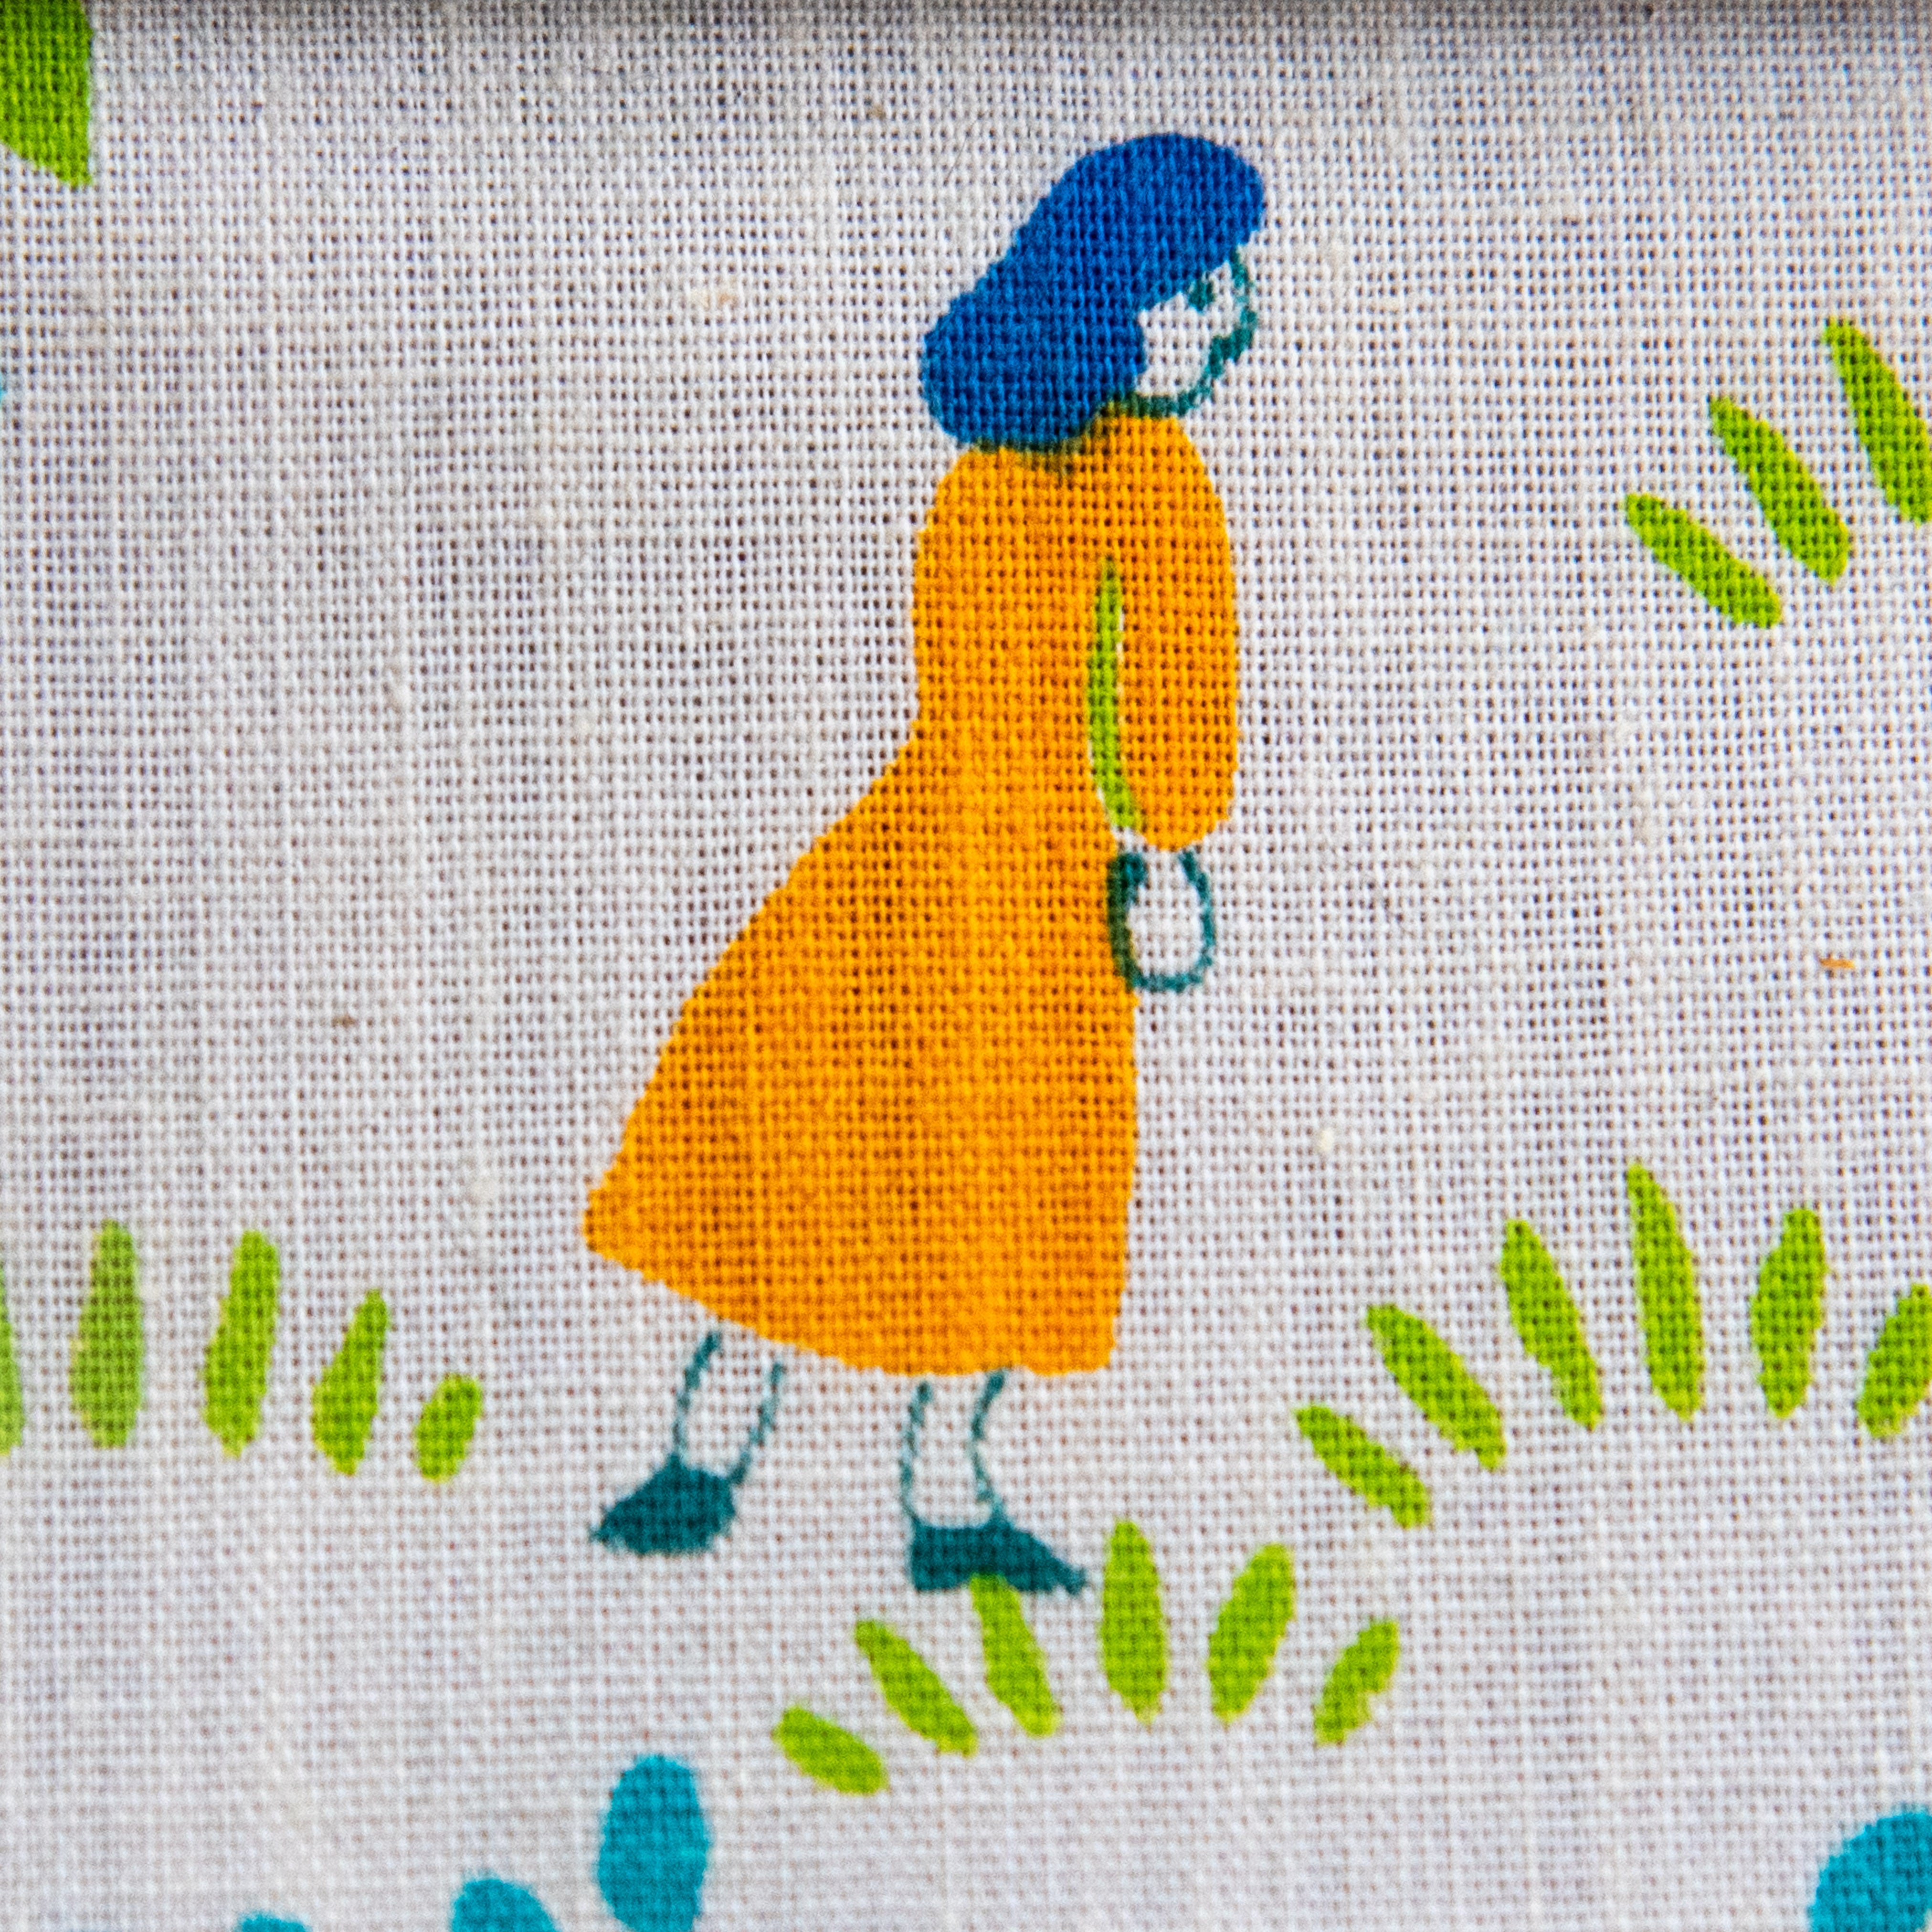 Keeper Pouch with Mid-Century Cotton Fabric: Eddie